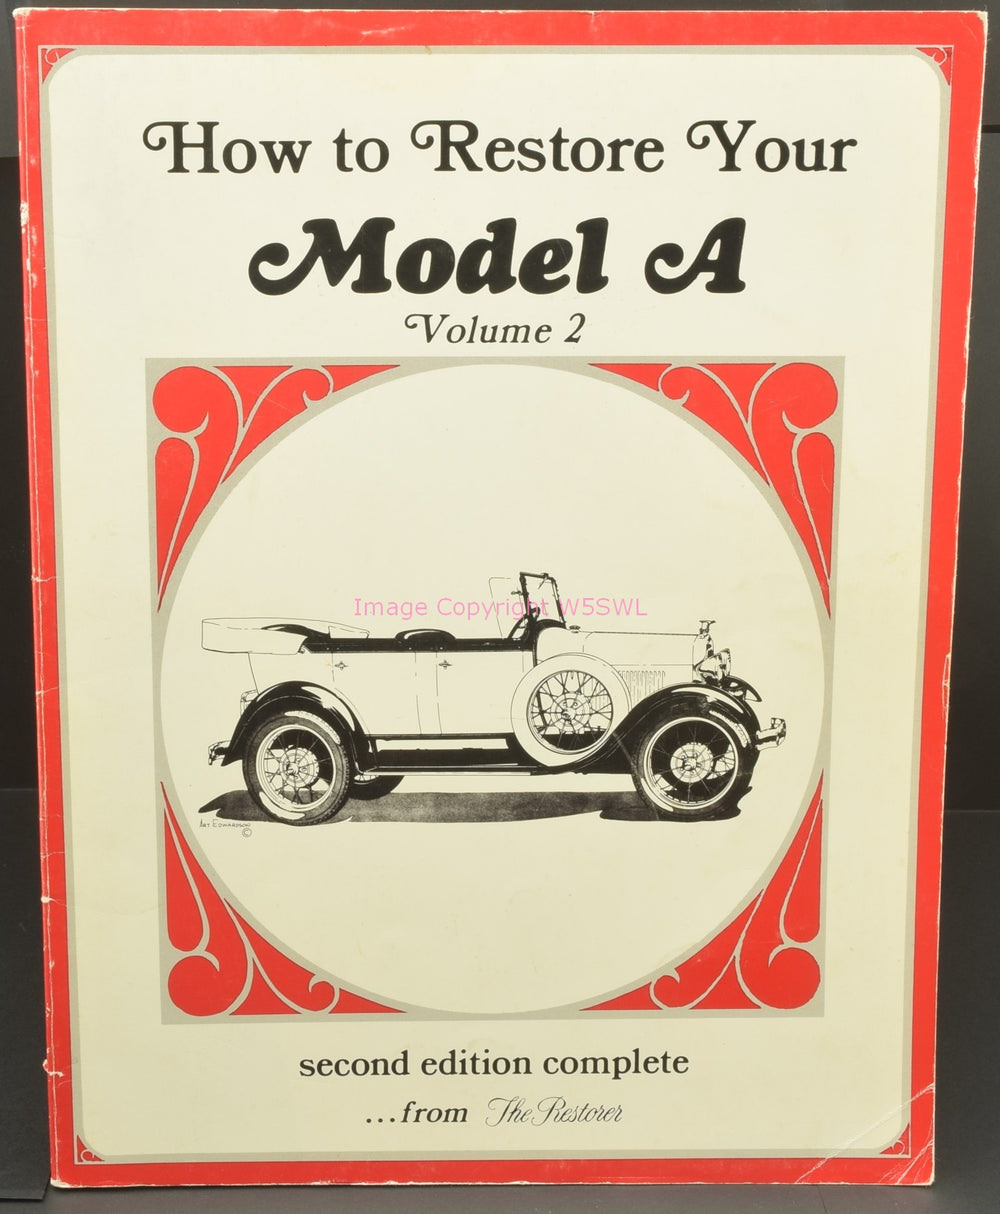 How To Restore Your Model A Vol 2 Second Edition Complete from the Restorer - Dave's Hobby Shop by W5SWL